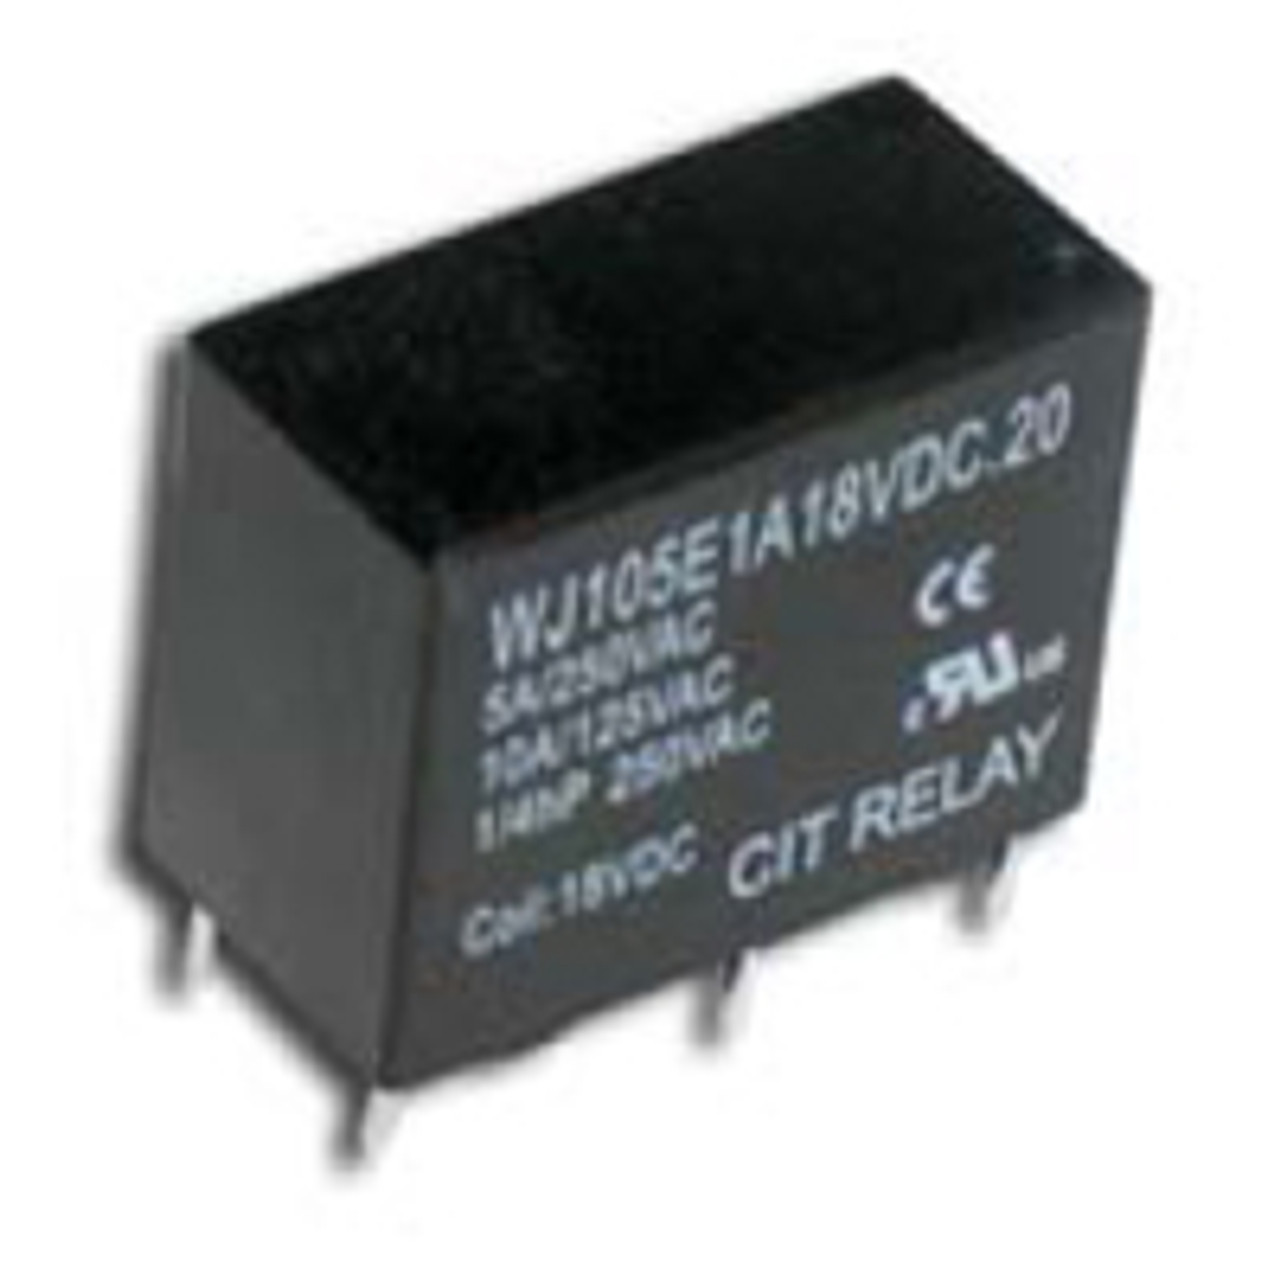 CIT Relay and Switch J105E1C48VDC.45 General Purpose Relays